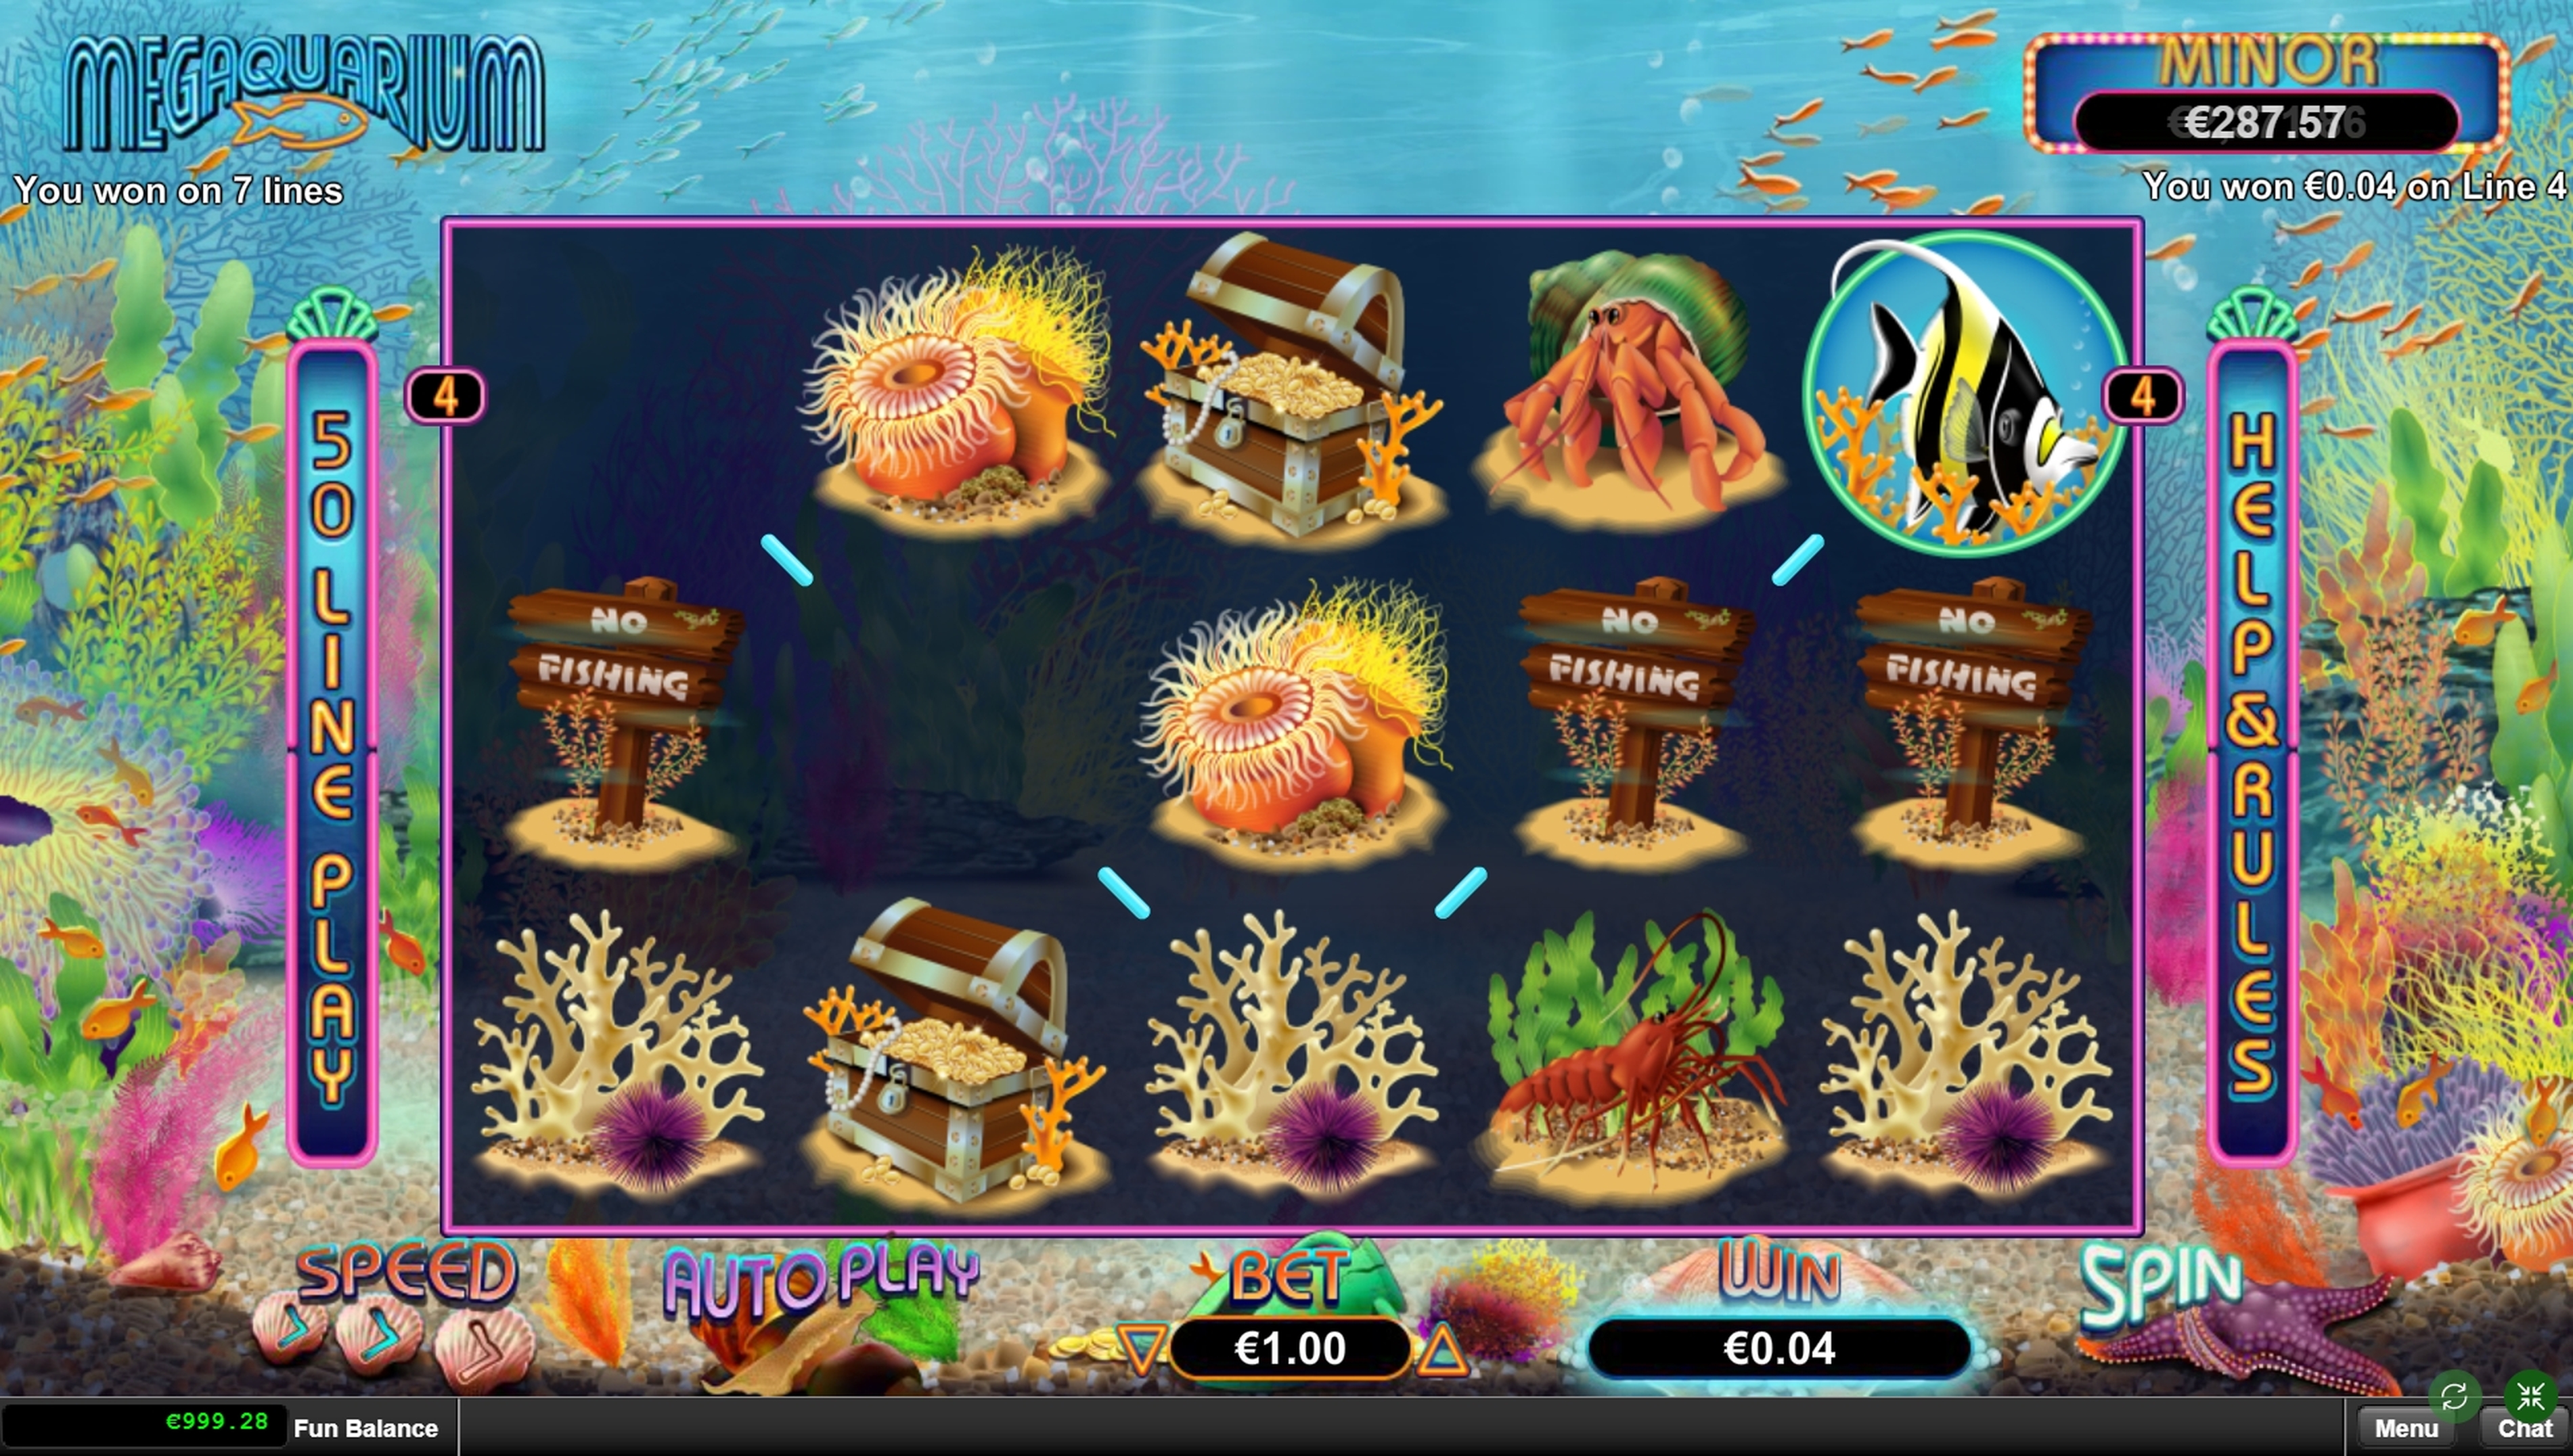 Win Money in Megaquarium Free Slot Game by Real Time Gaming